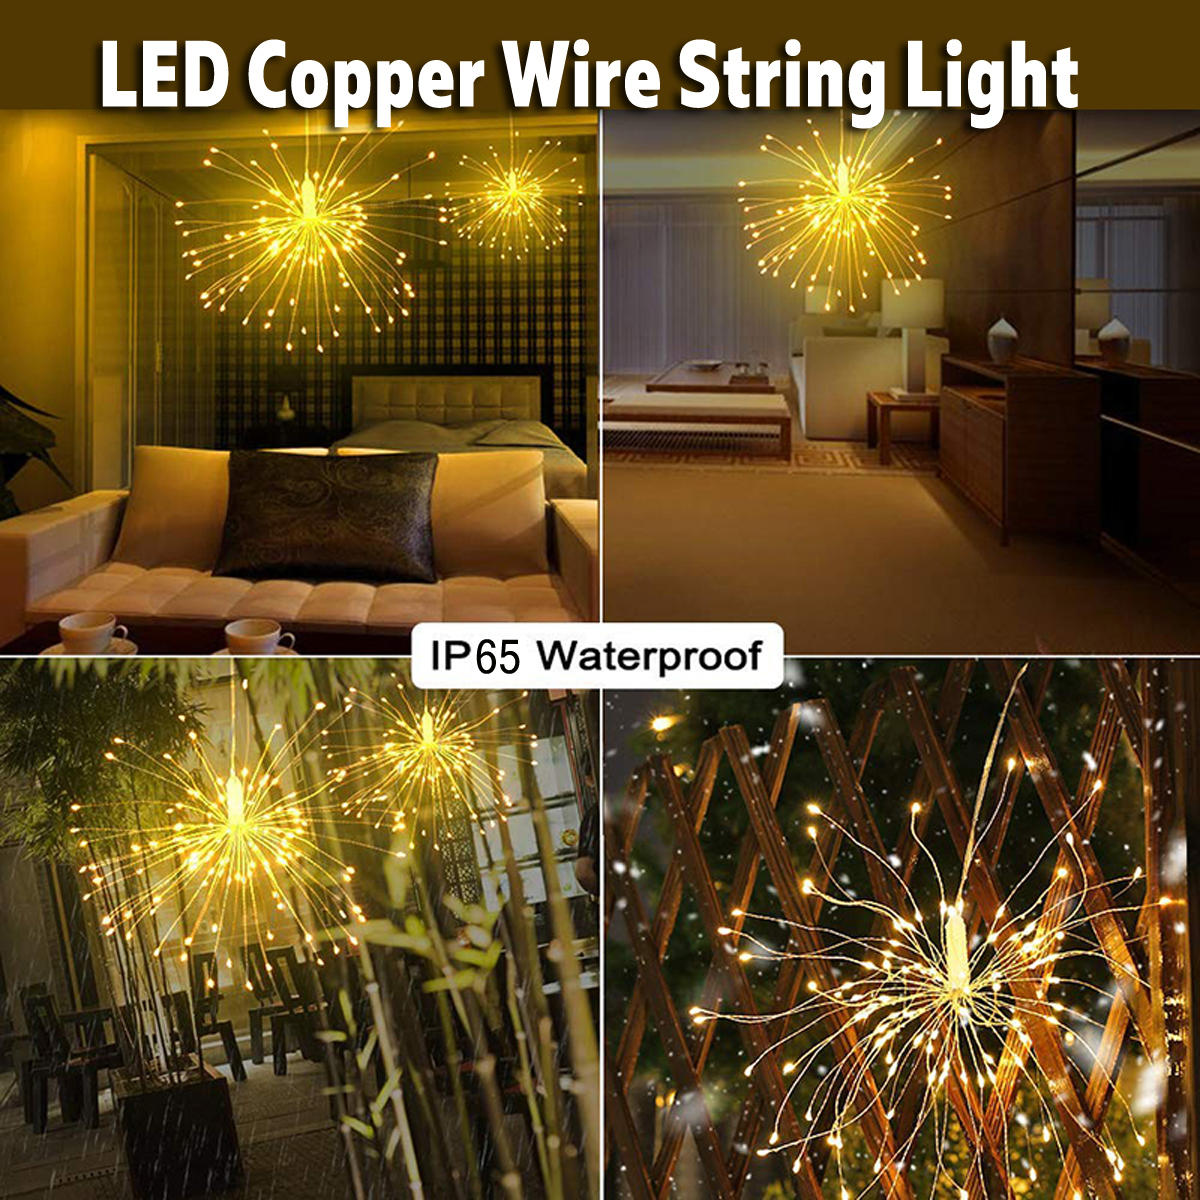 USB-Battery-Dual-Powered-180-LED-Starburst-String-Fairy-Light-Holiday-Wedding-Party-Home-Decoration-1412539-10